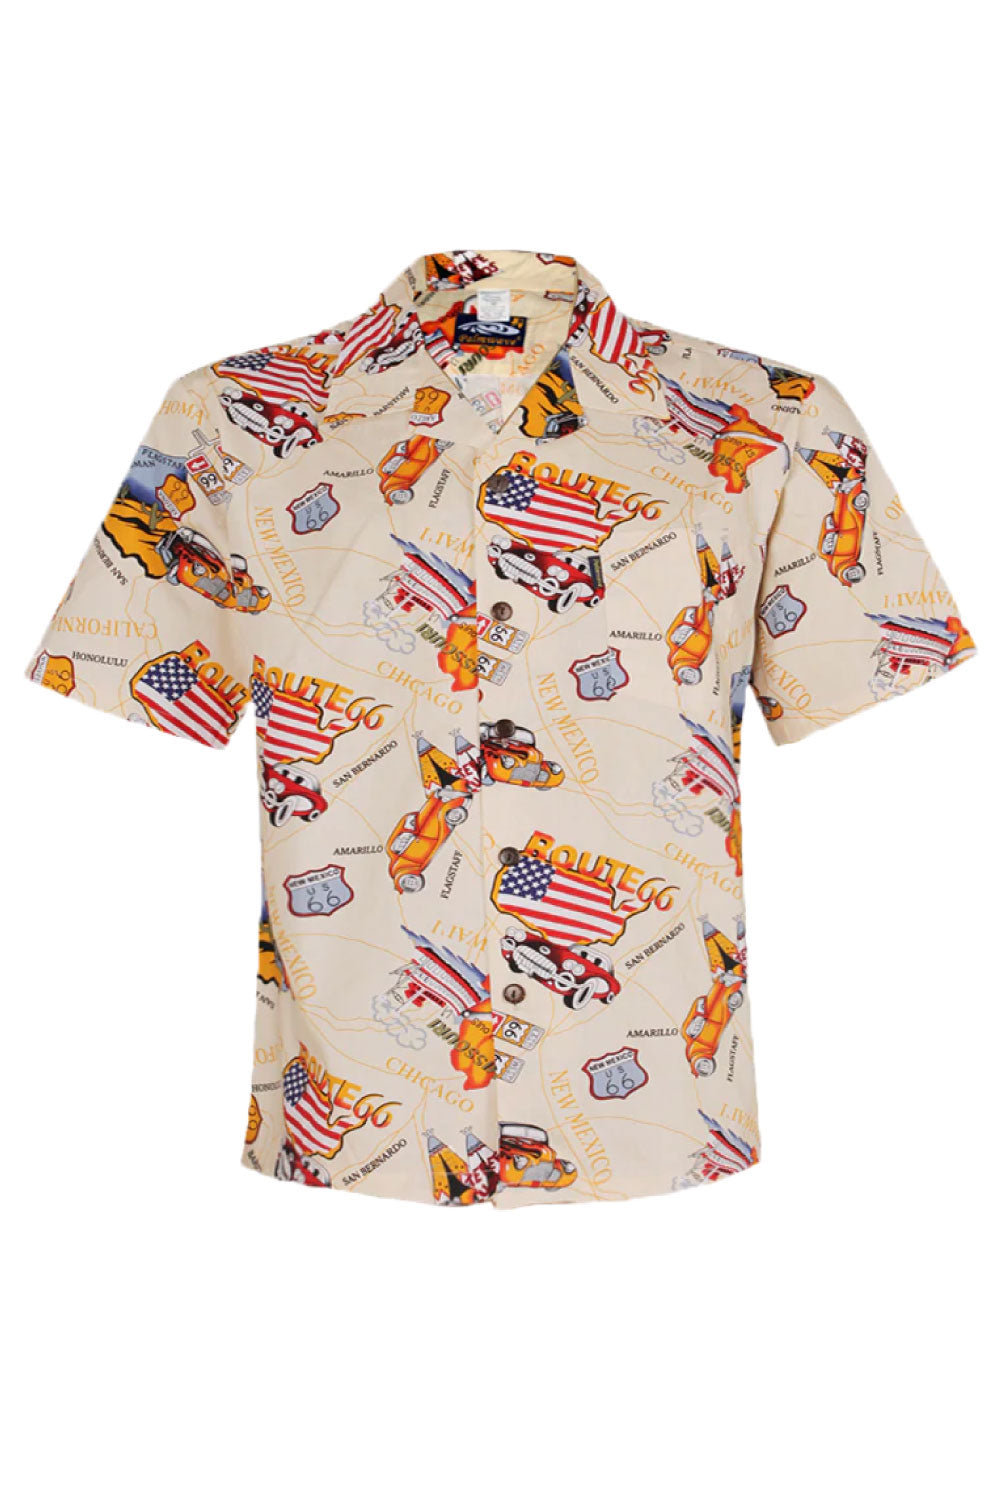 Image of the front of the Palmwave Beige Route 66 Men's Shirt.